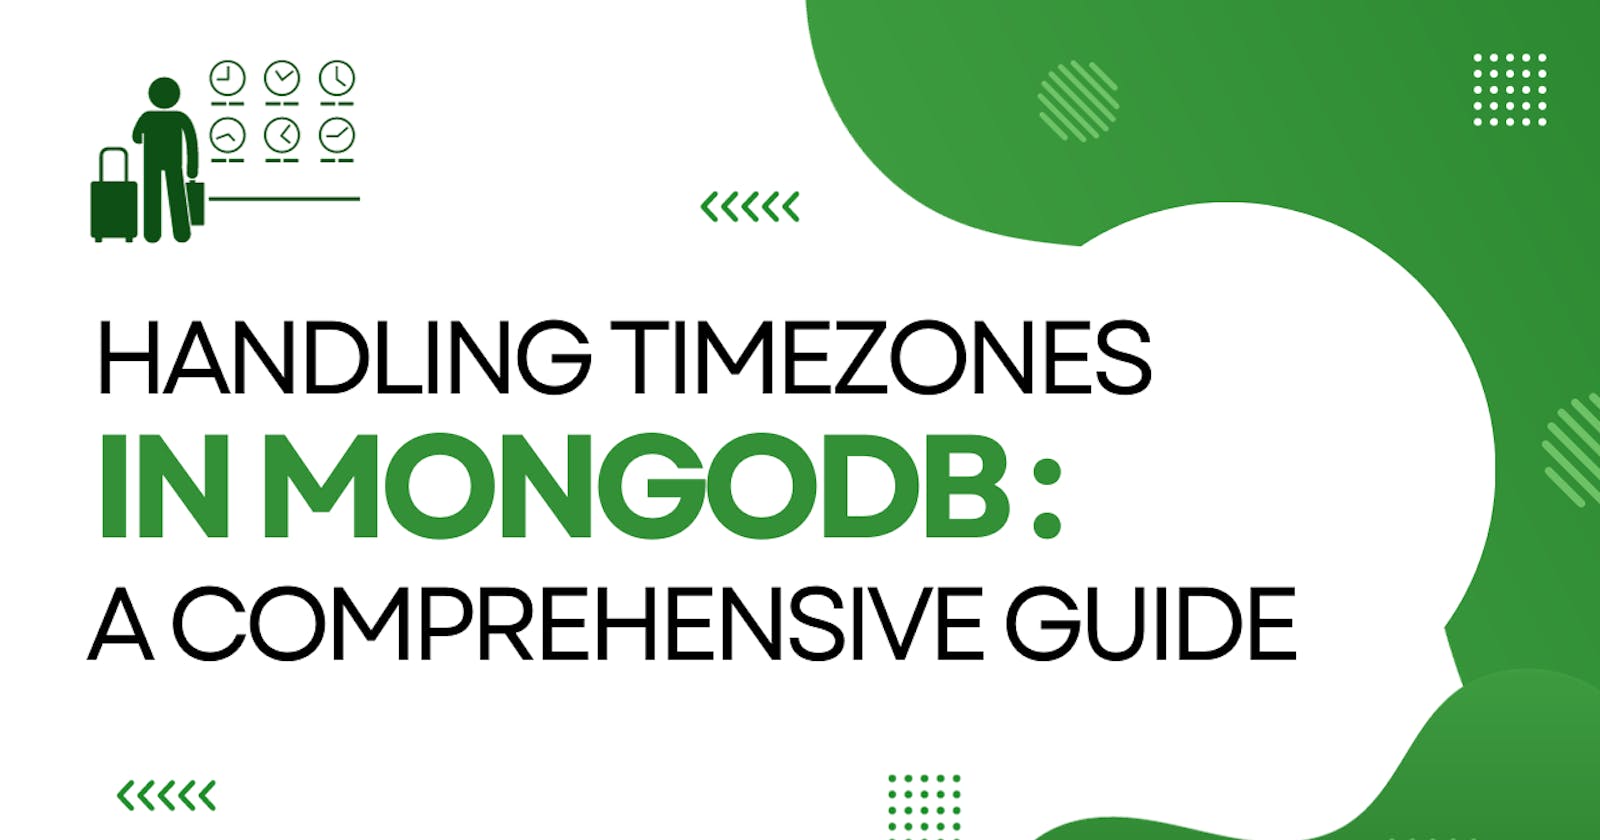 Handling Timezones in MongoDB: A Comprehensive Guide 🌐